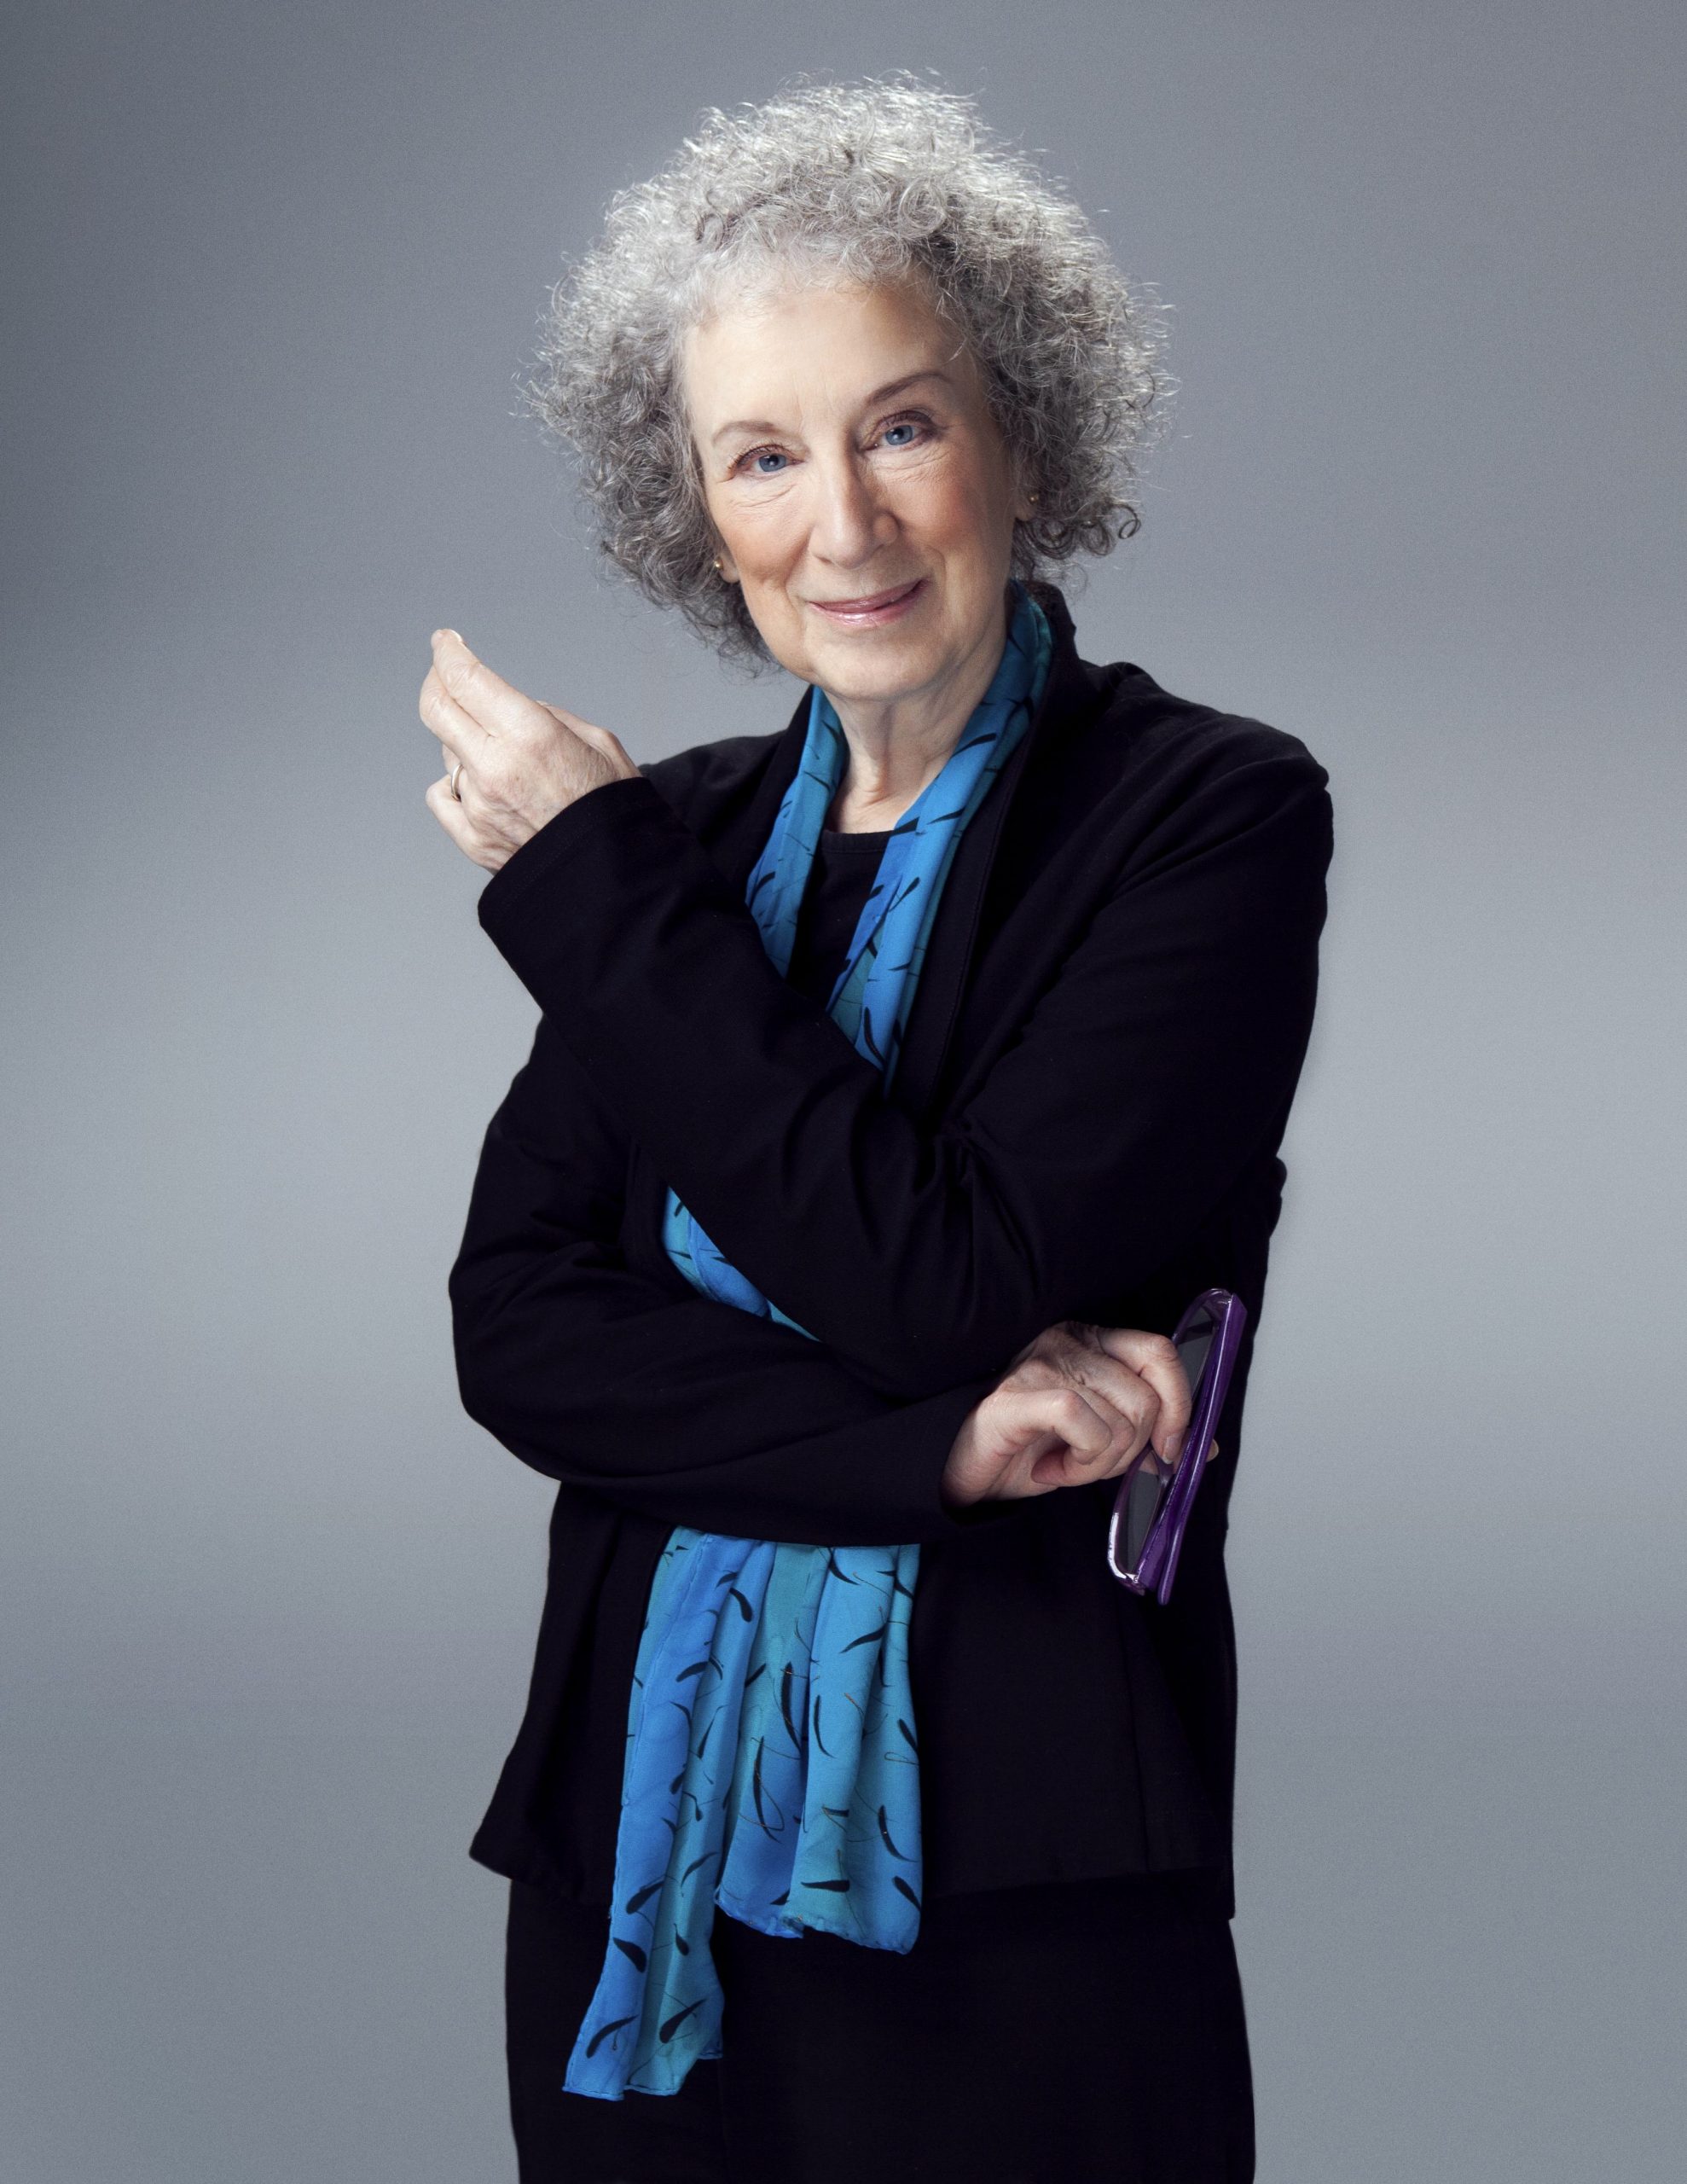 Margaret Atwood author photograph for publicity rights cleared (c) Jean Malek 01.13